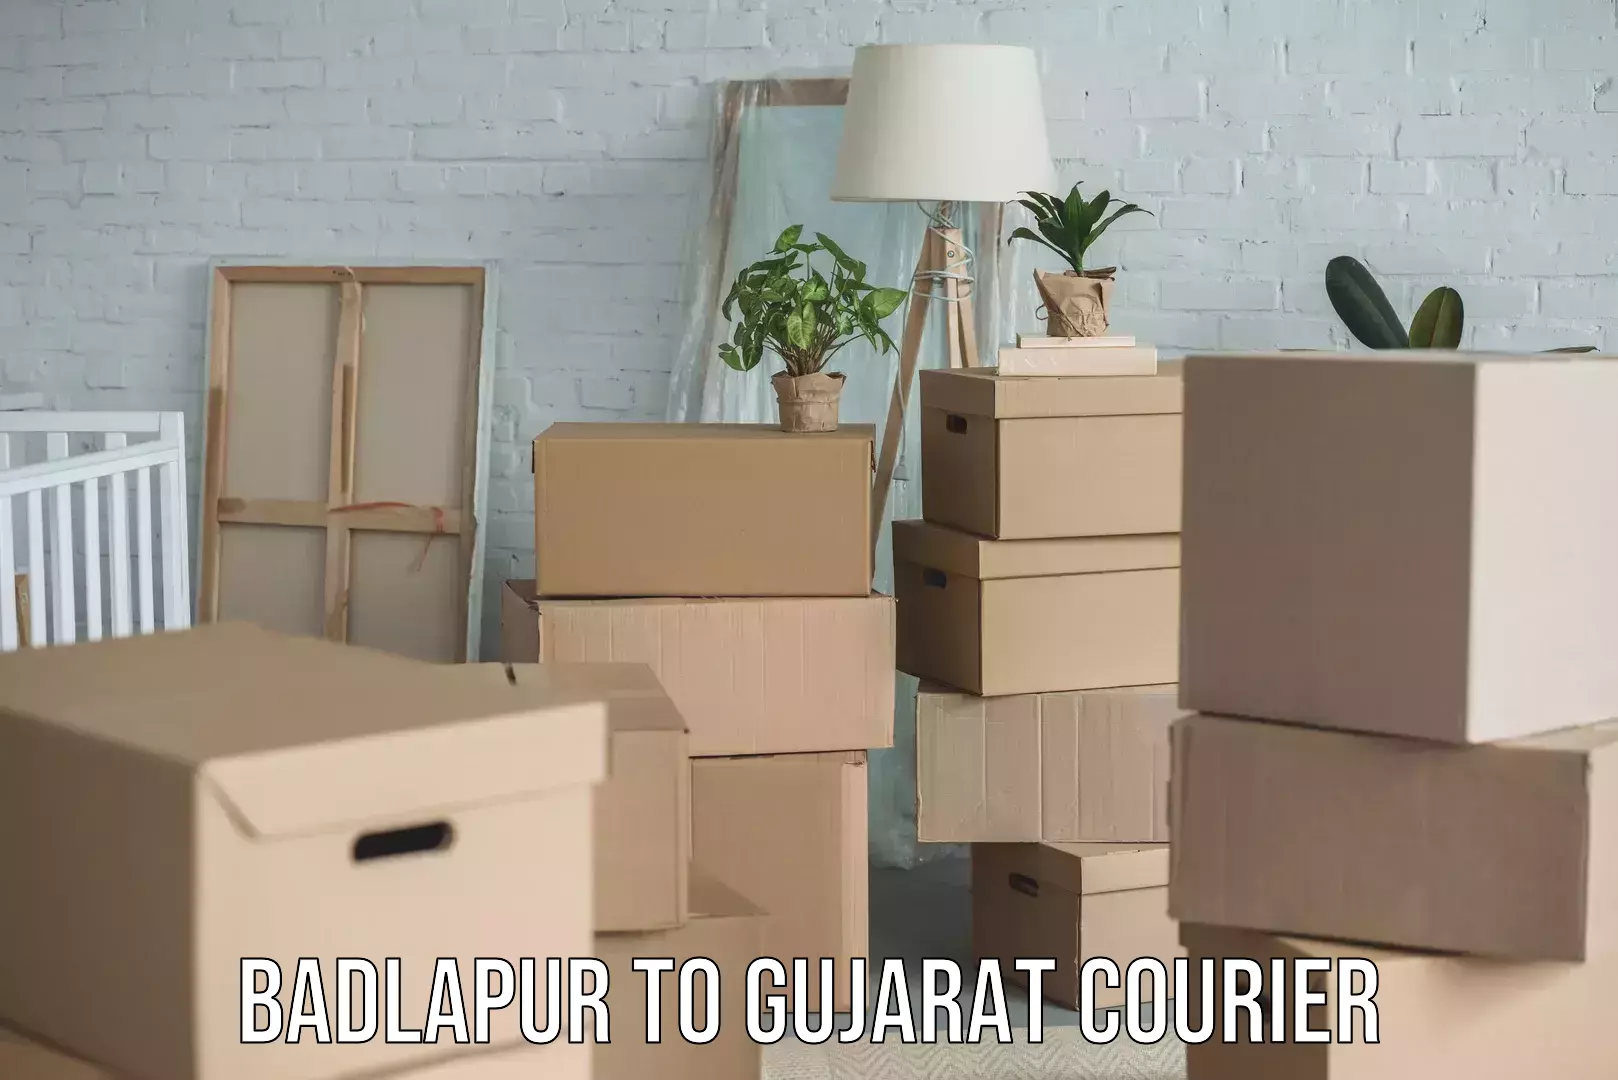 Sustainable shipping practices Badlapur to Gujarat